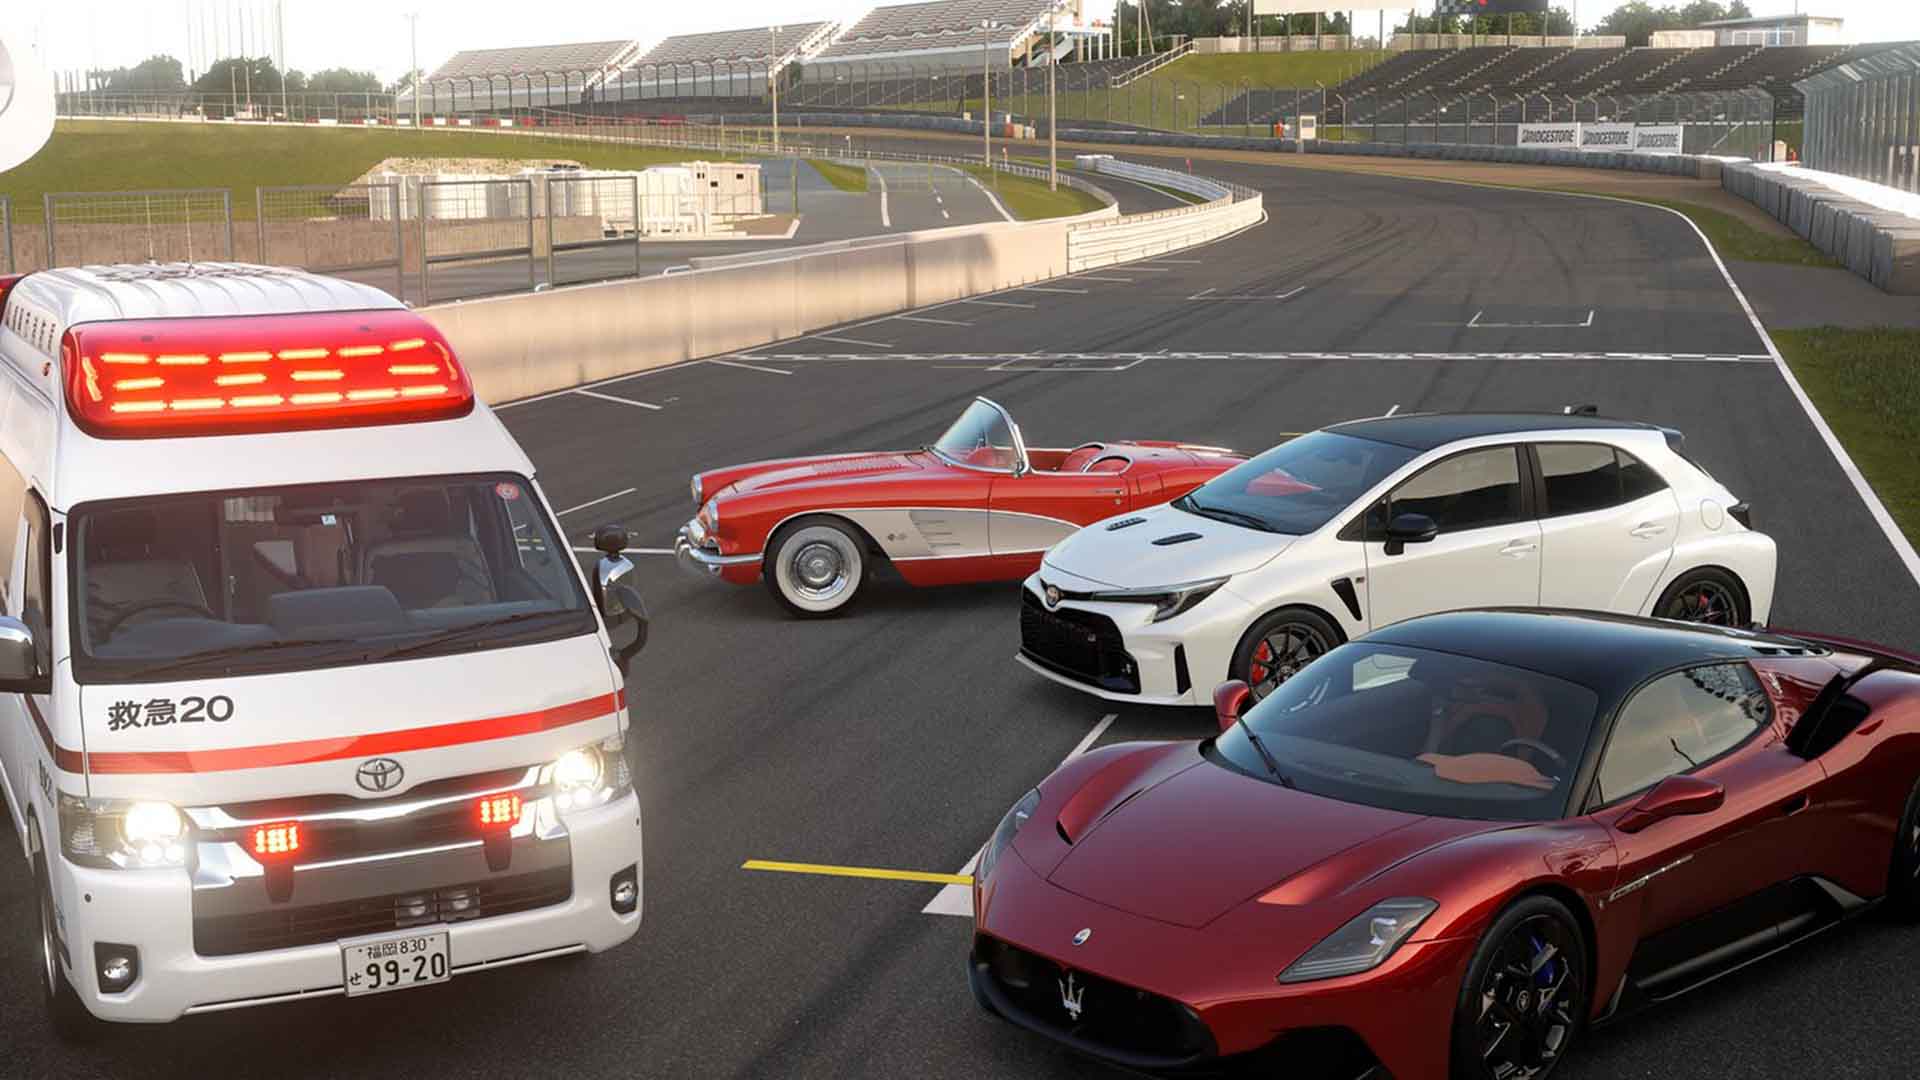 Gran Turismo 7: New title announced at PS5 games launch